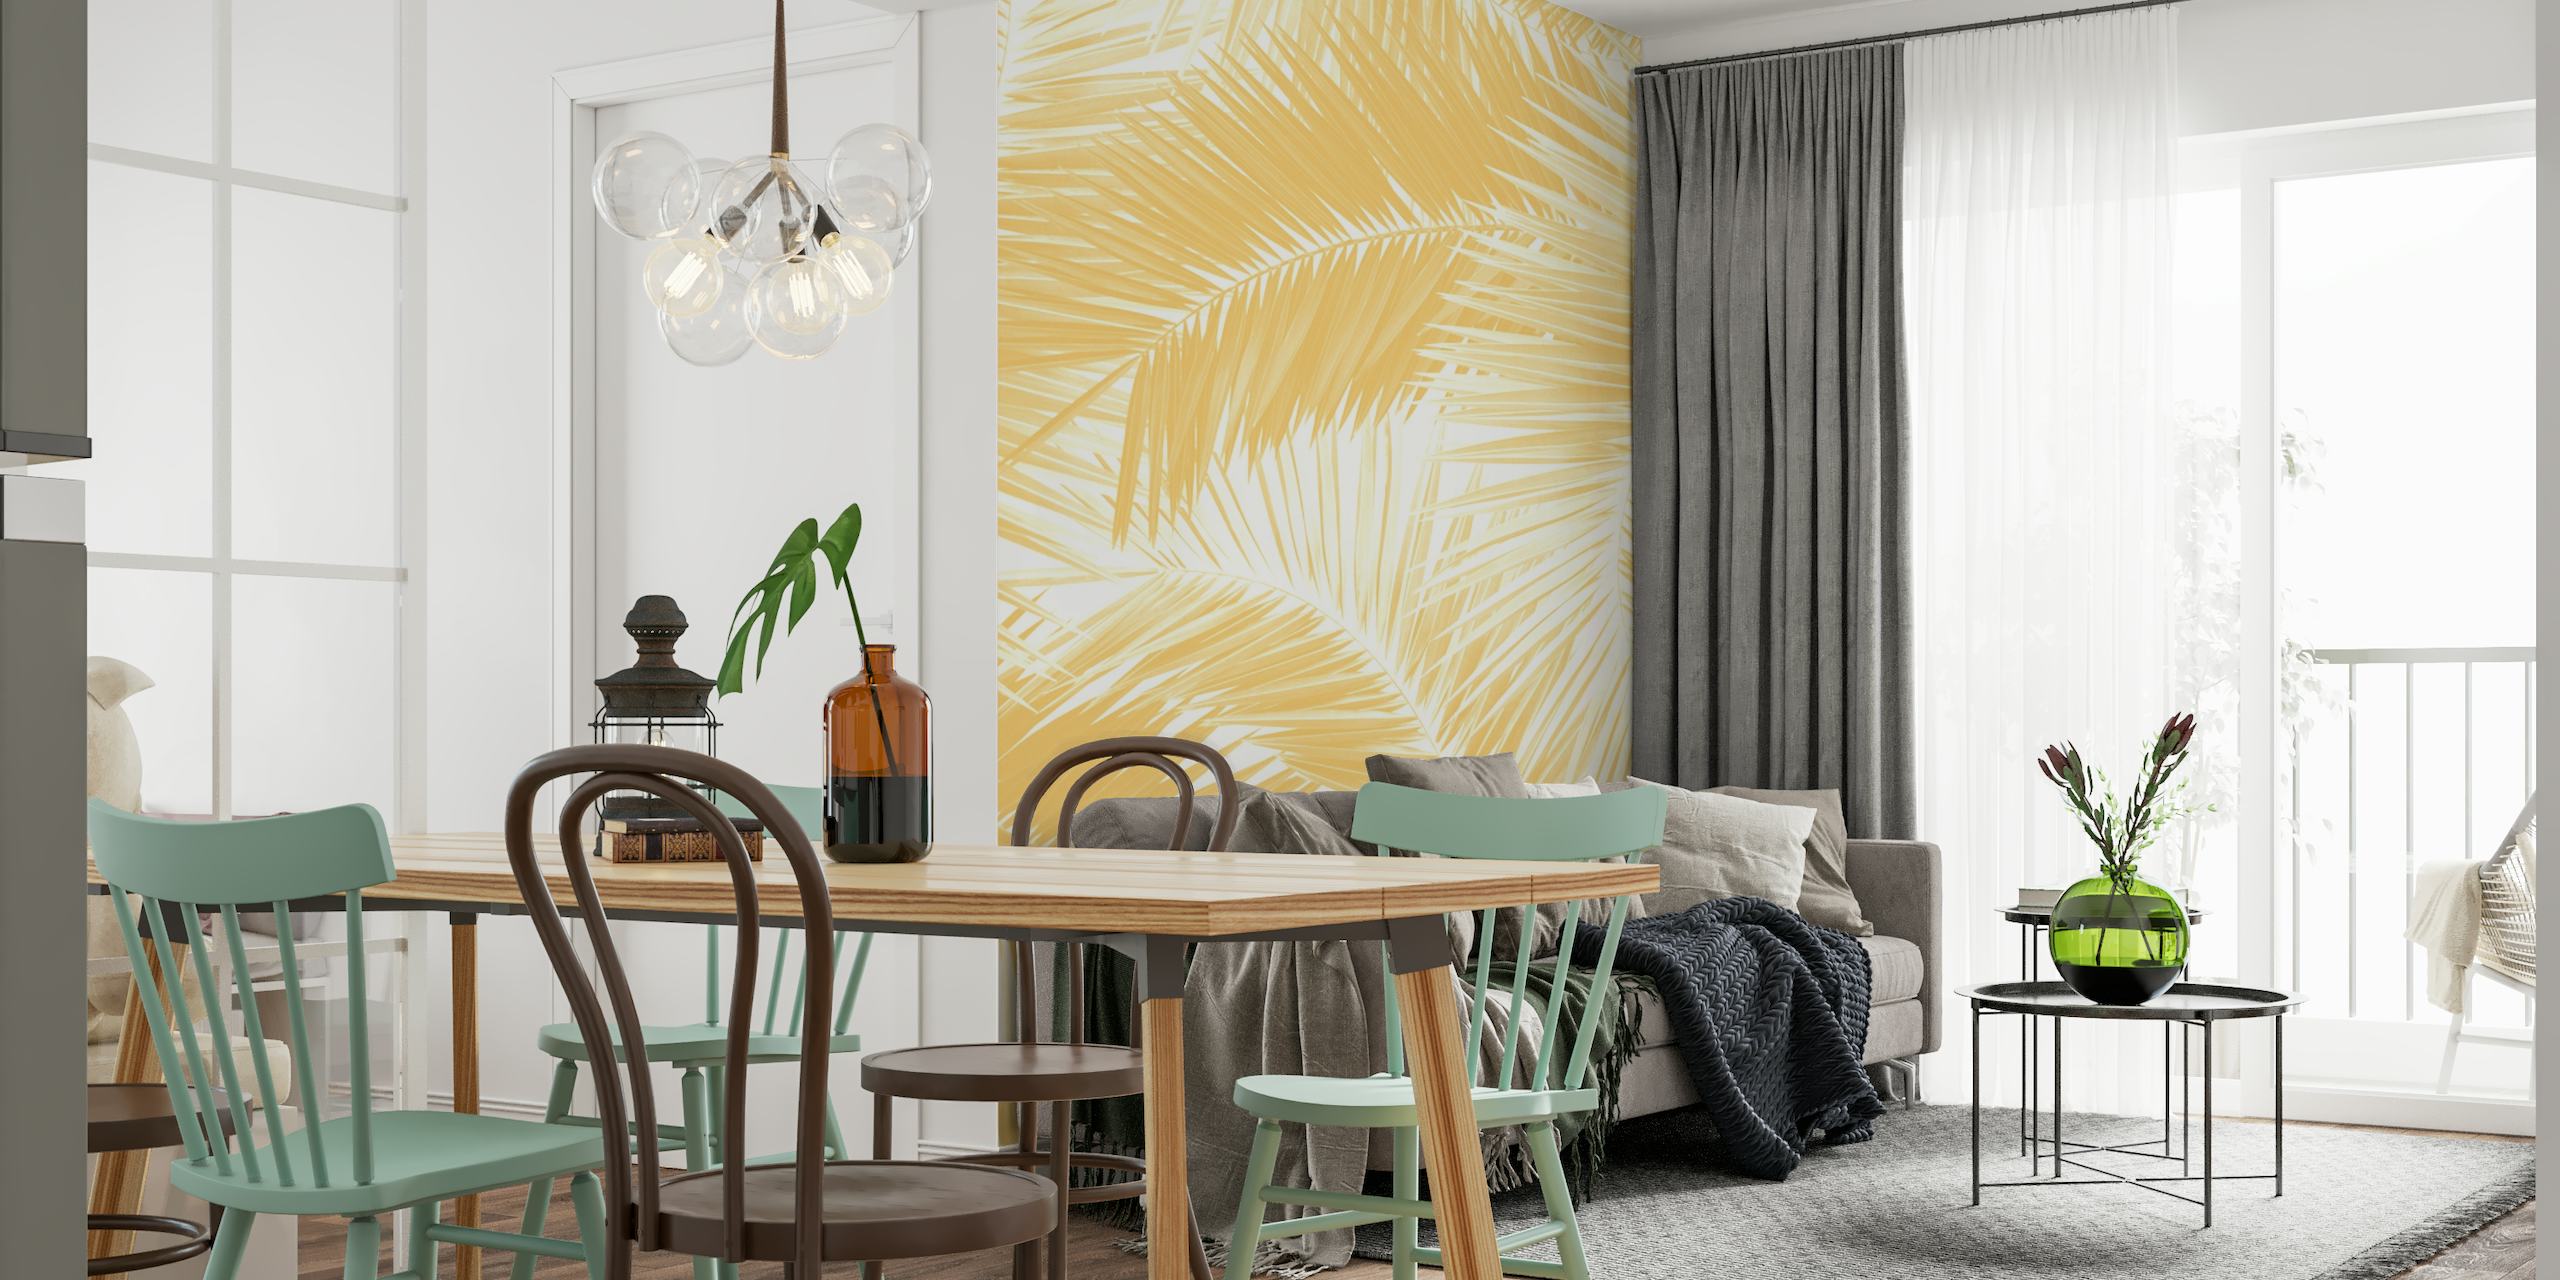 Tropical palm leaf pattern wall mural in warm tones